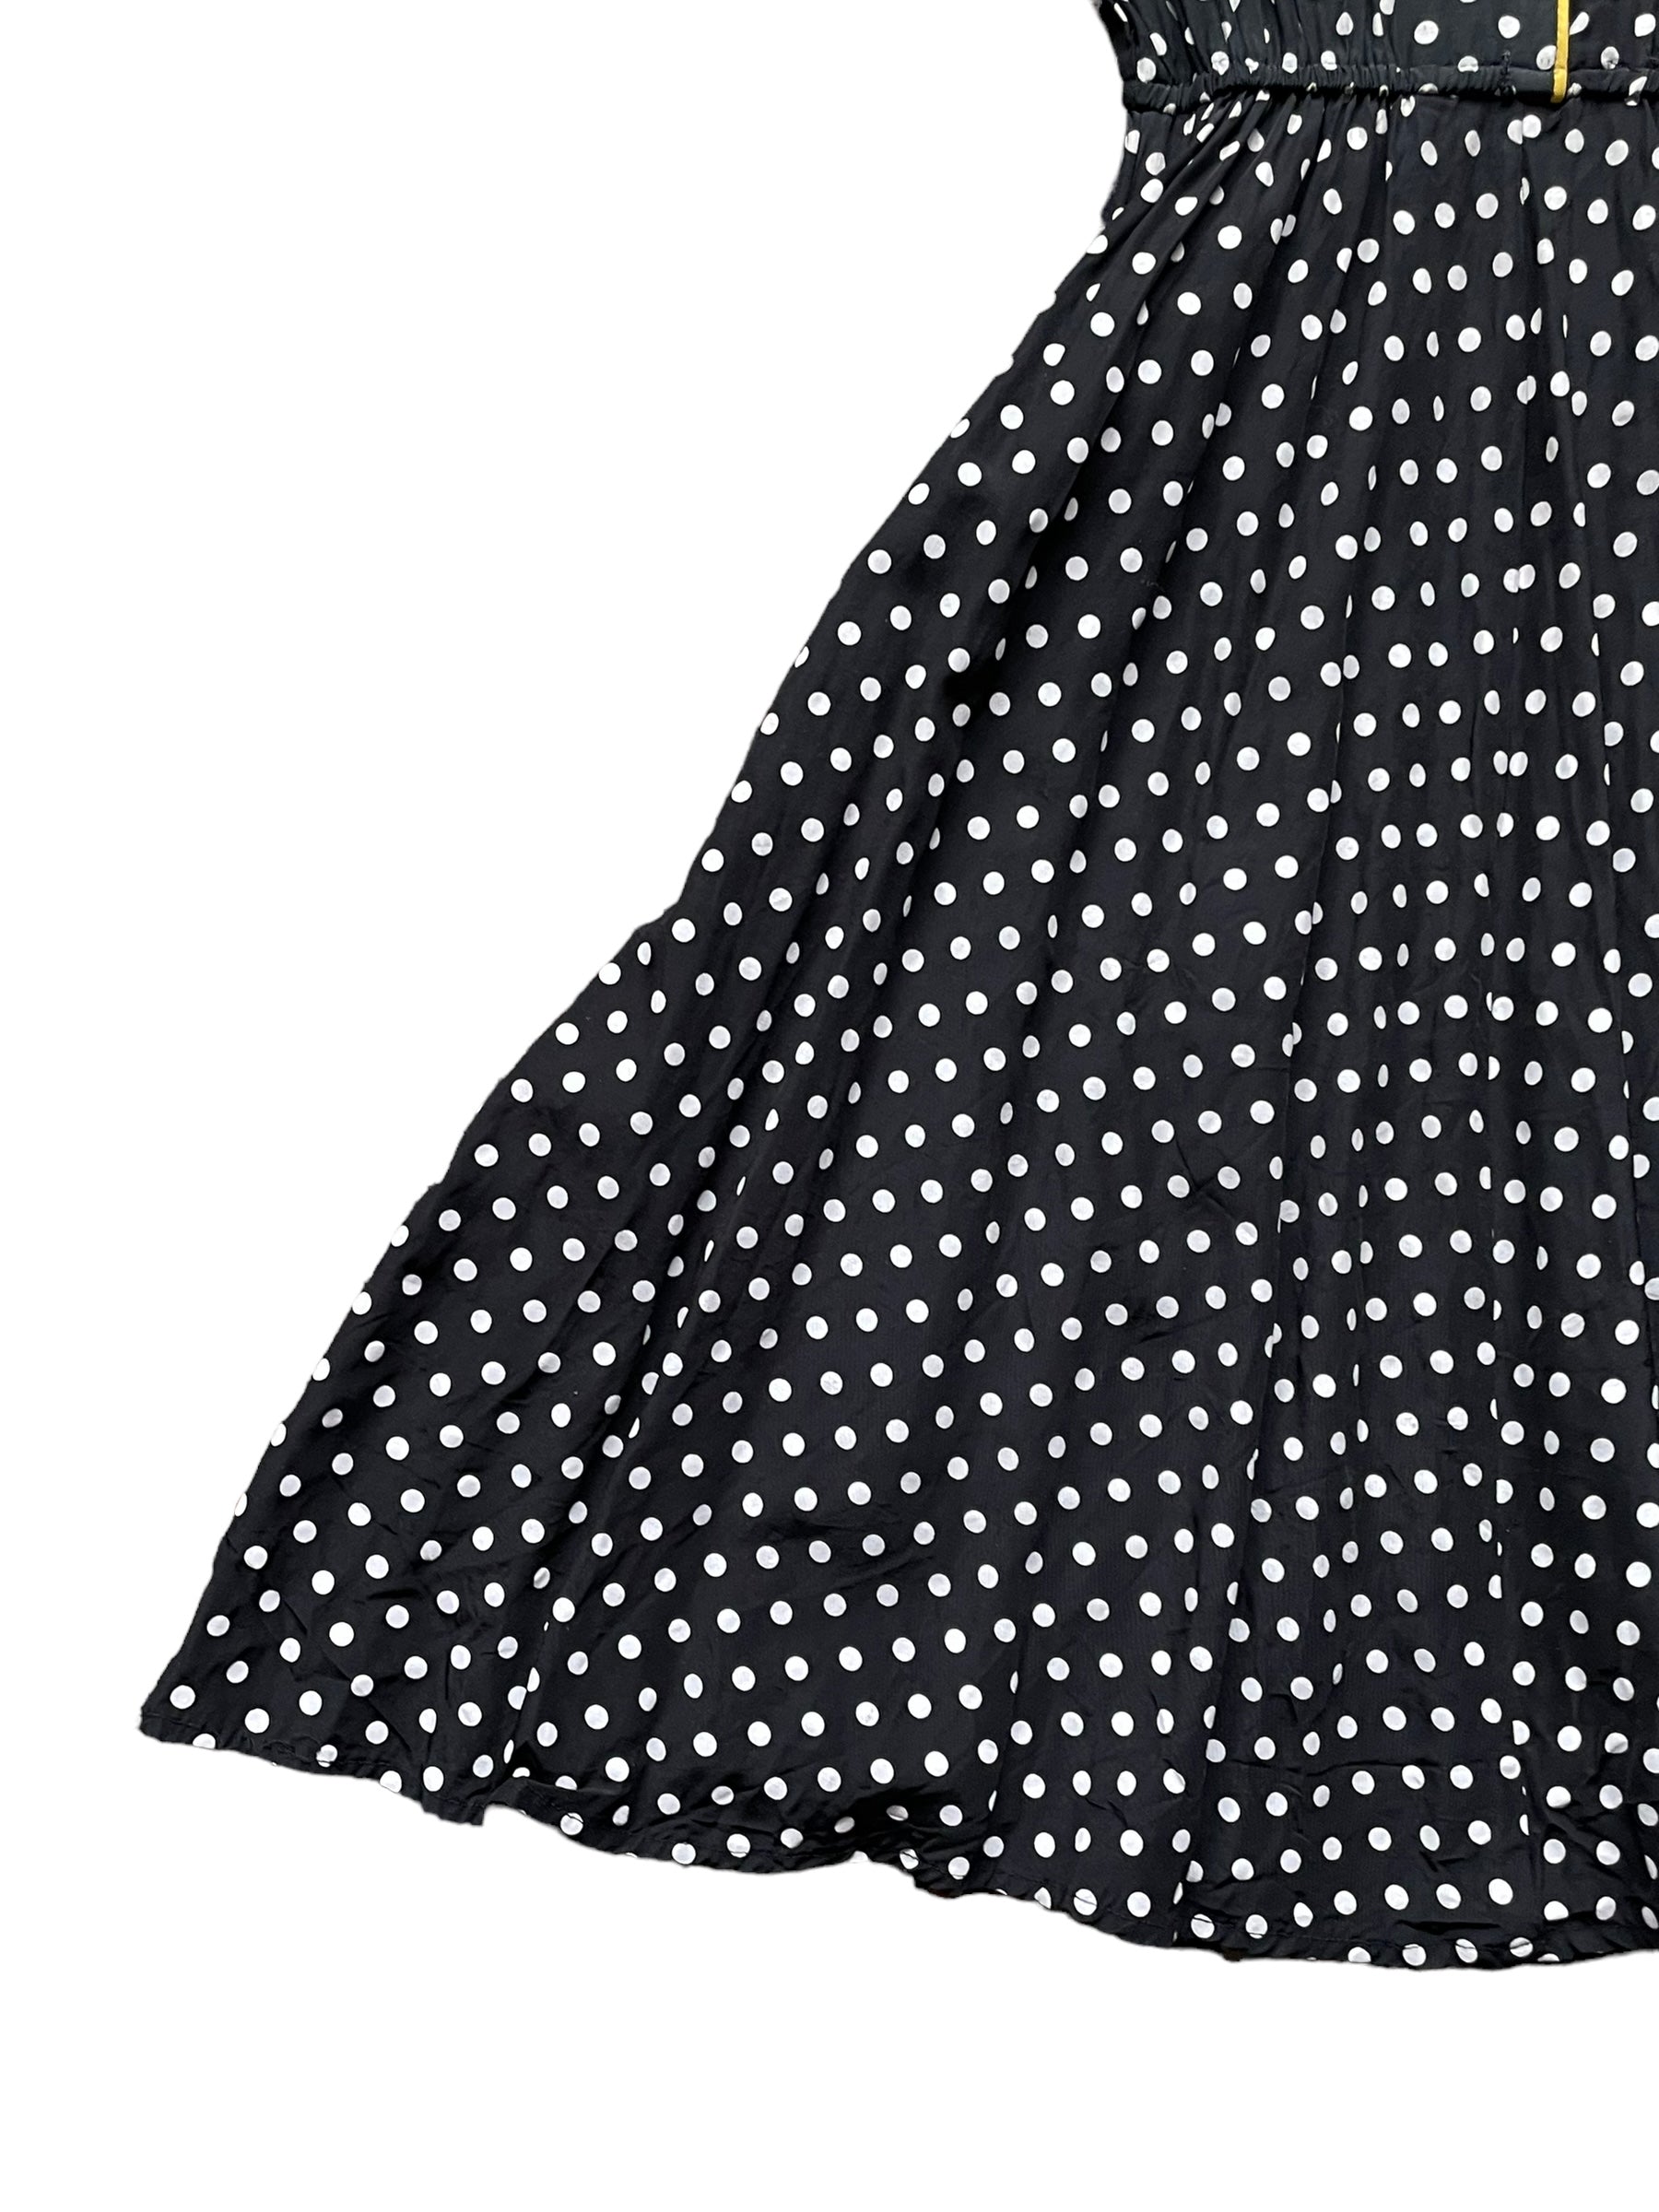 Front right side skirt view of Vintage 80s Does 40s Polka Dot Dress SZ M-L |  Barn Owl Vintage Dresses| Seattle Vintage Ladies Clothing